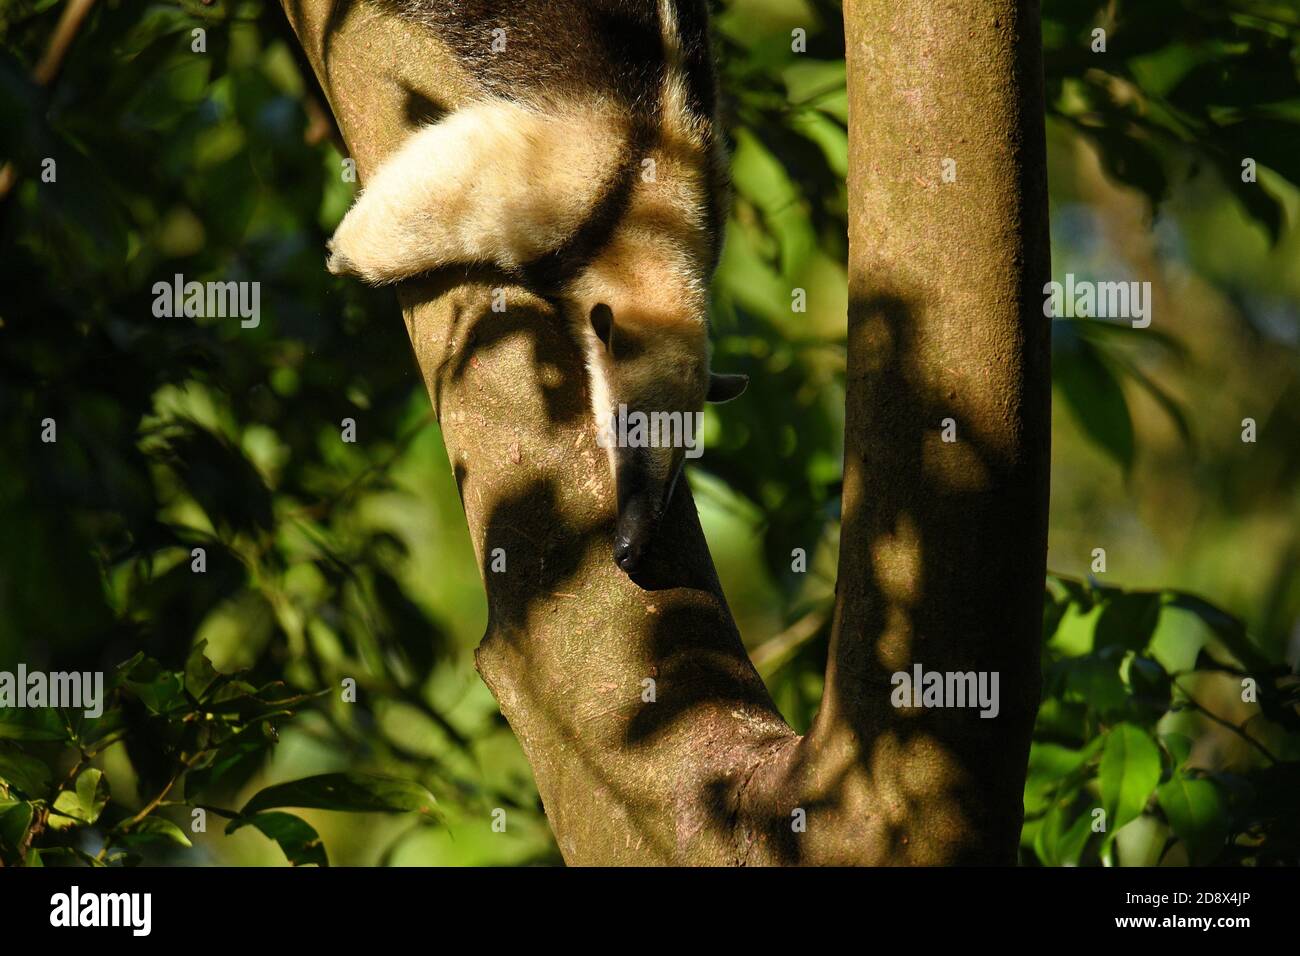 Northern Tamandua - Tamandua mexicana species of anteater, tropical and subtropical forests from southern Mexico, Central America to the edge of the n Stock Photo